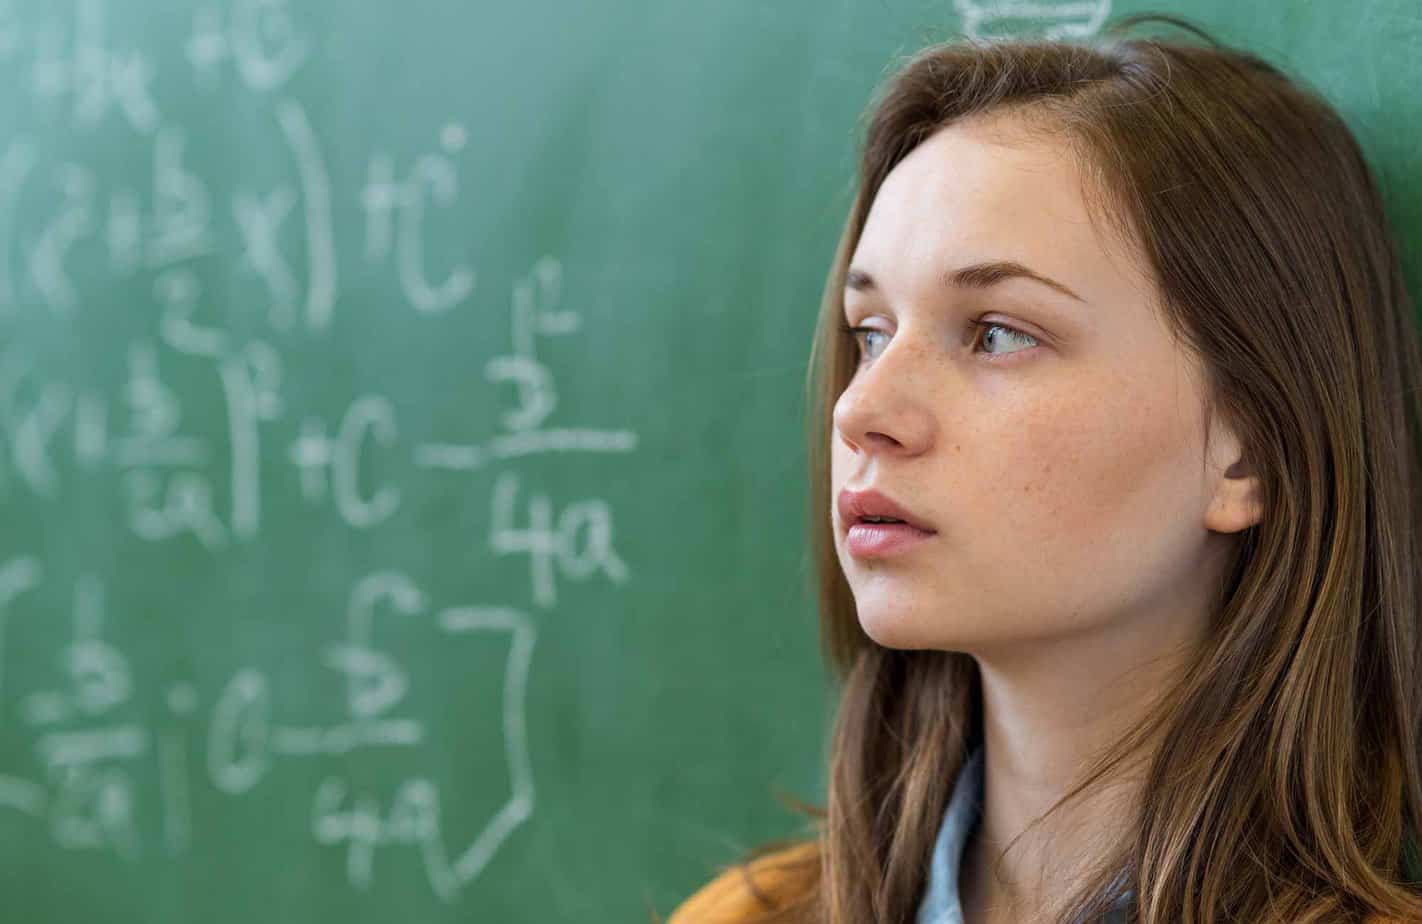 High school female student looking at chalkboard with math